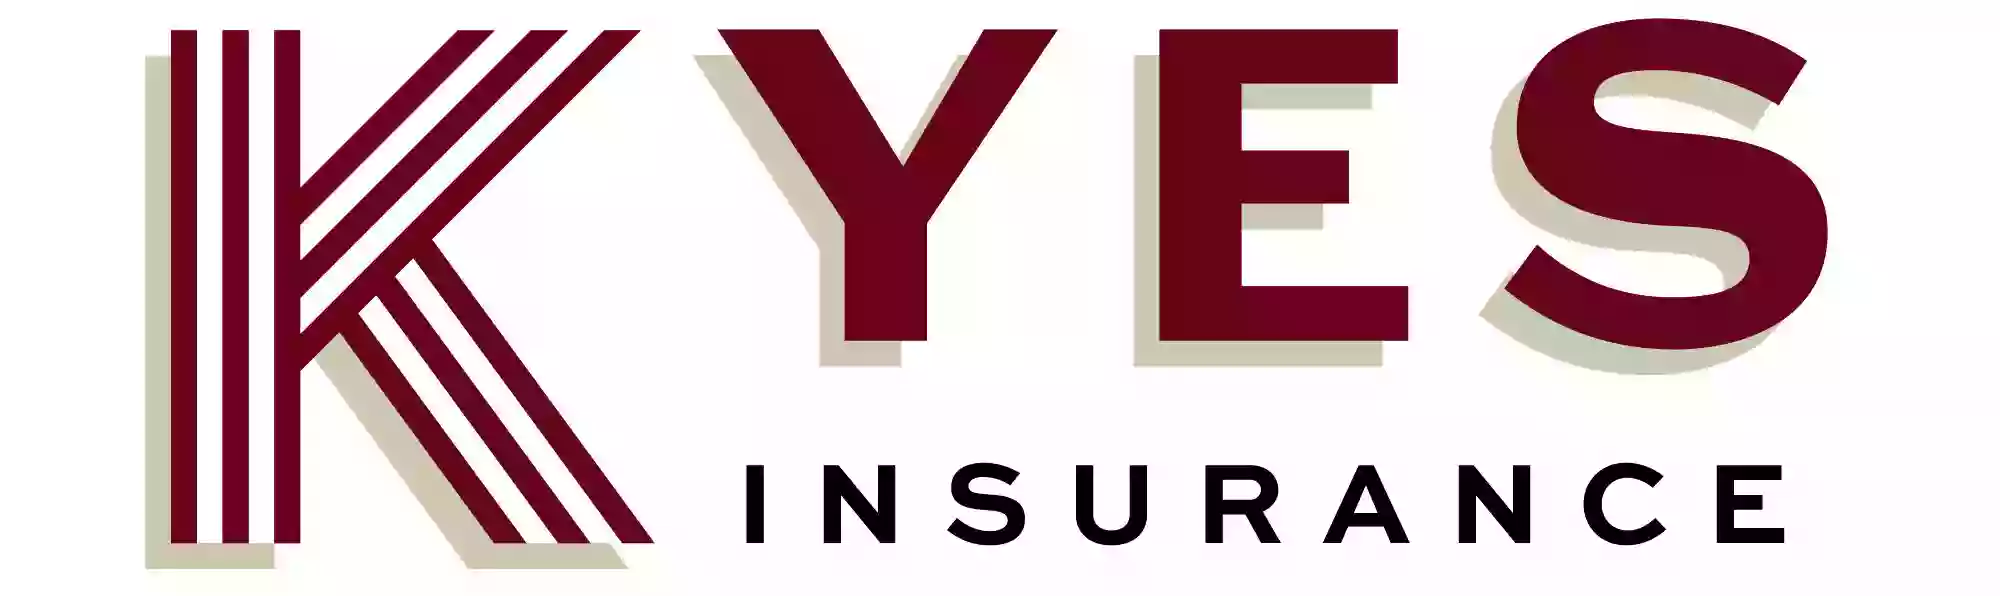 Kyes Insurance Agency